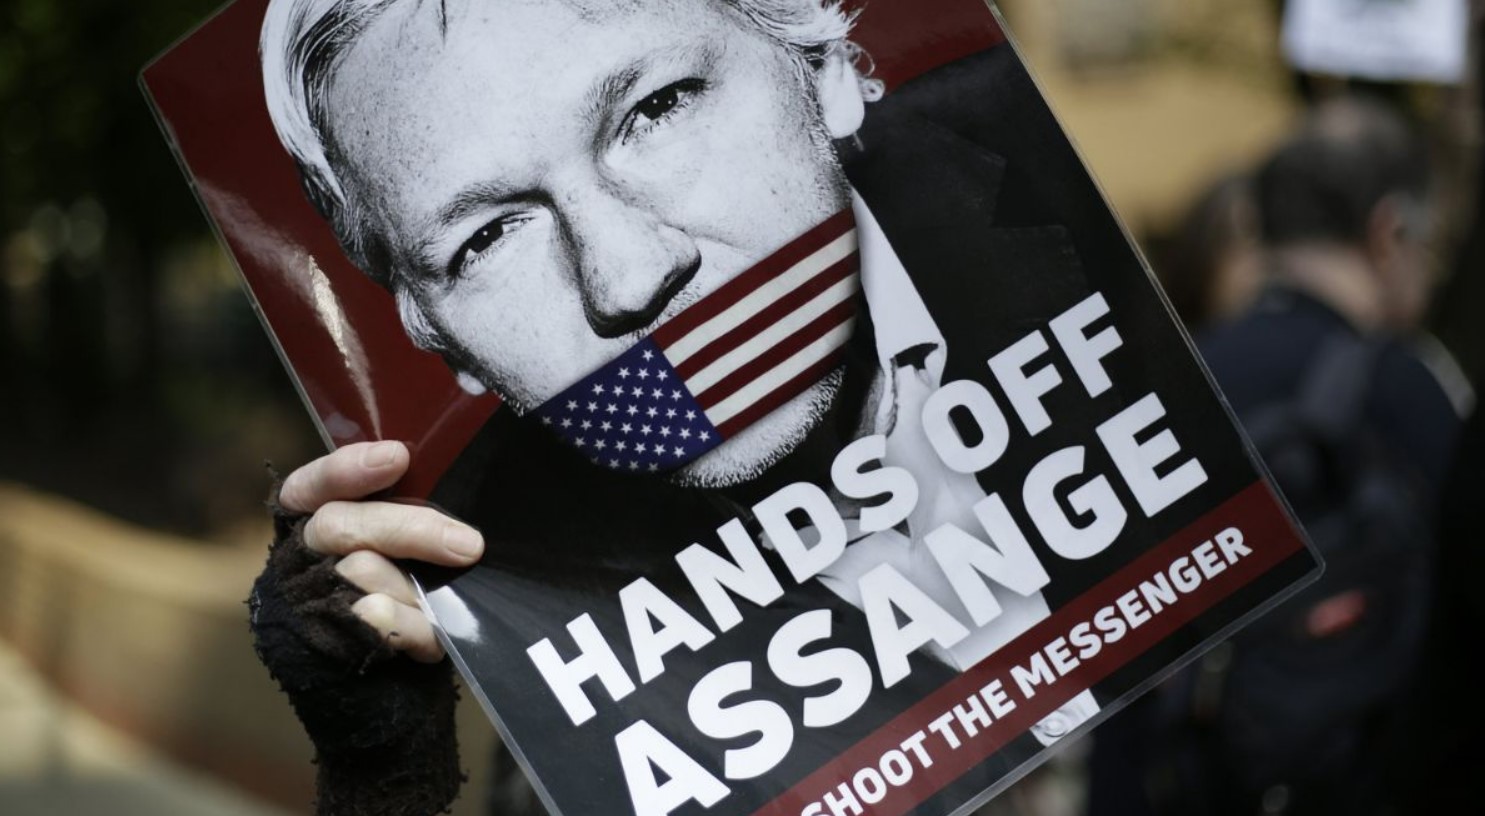  Thousands of People to Form Human Chain Around U.K. Parliament to Demand Freedom for Assange  Hands-off-assange